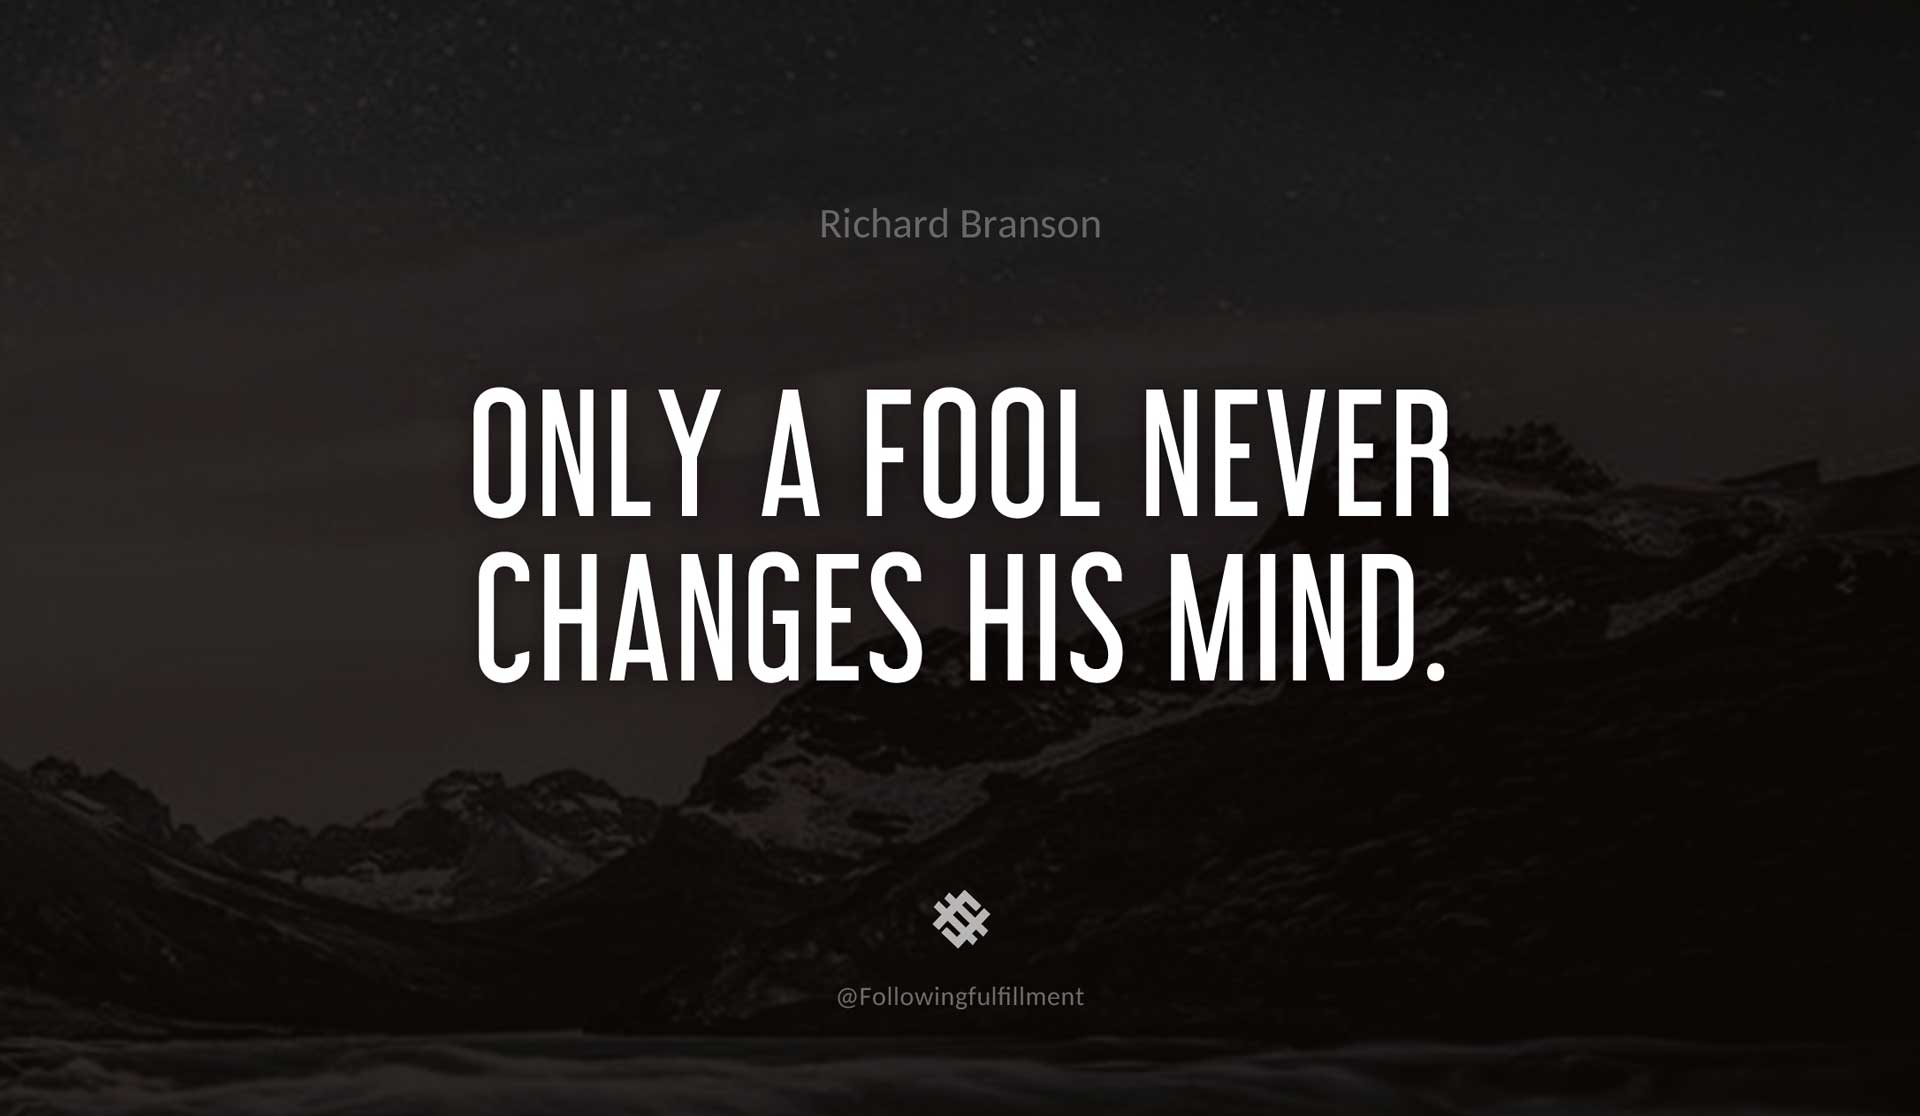 Only-a-fool-never-changes-his-mind.-RICHARD-BRANSON-Quote.jpg